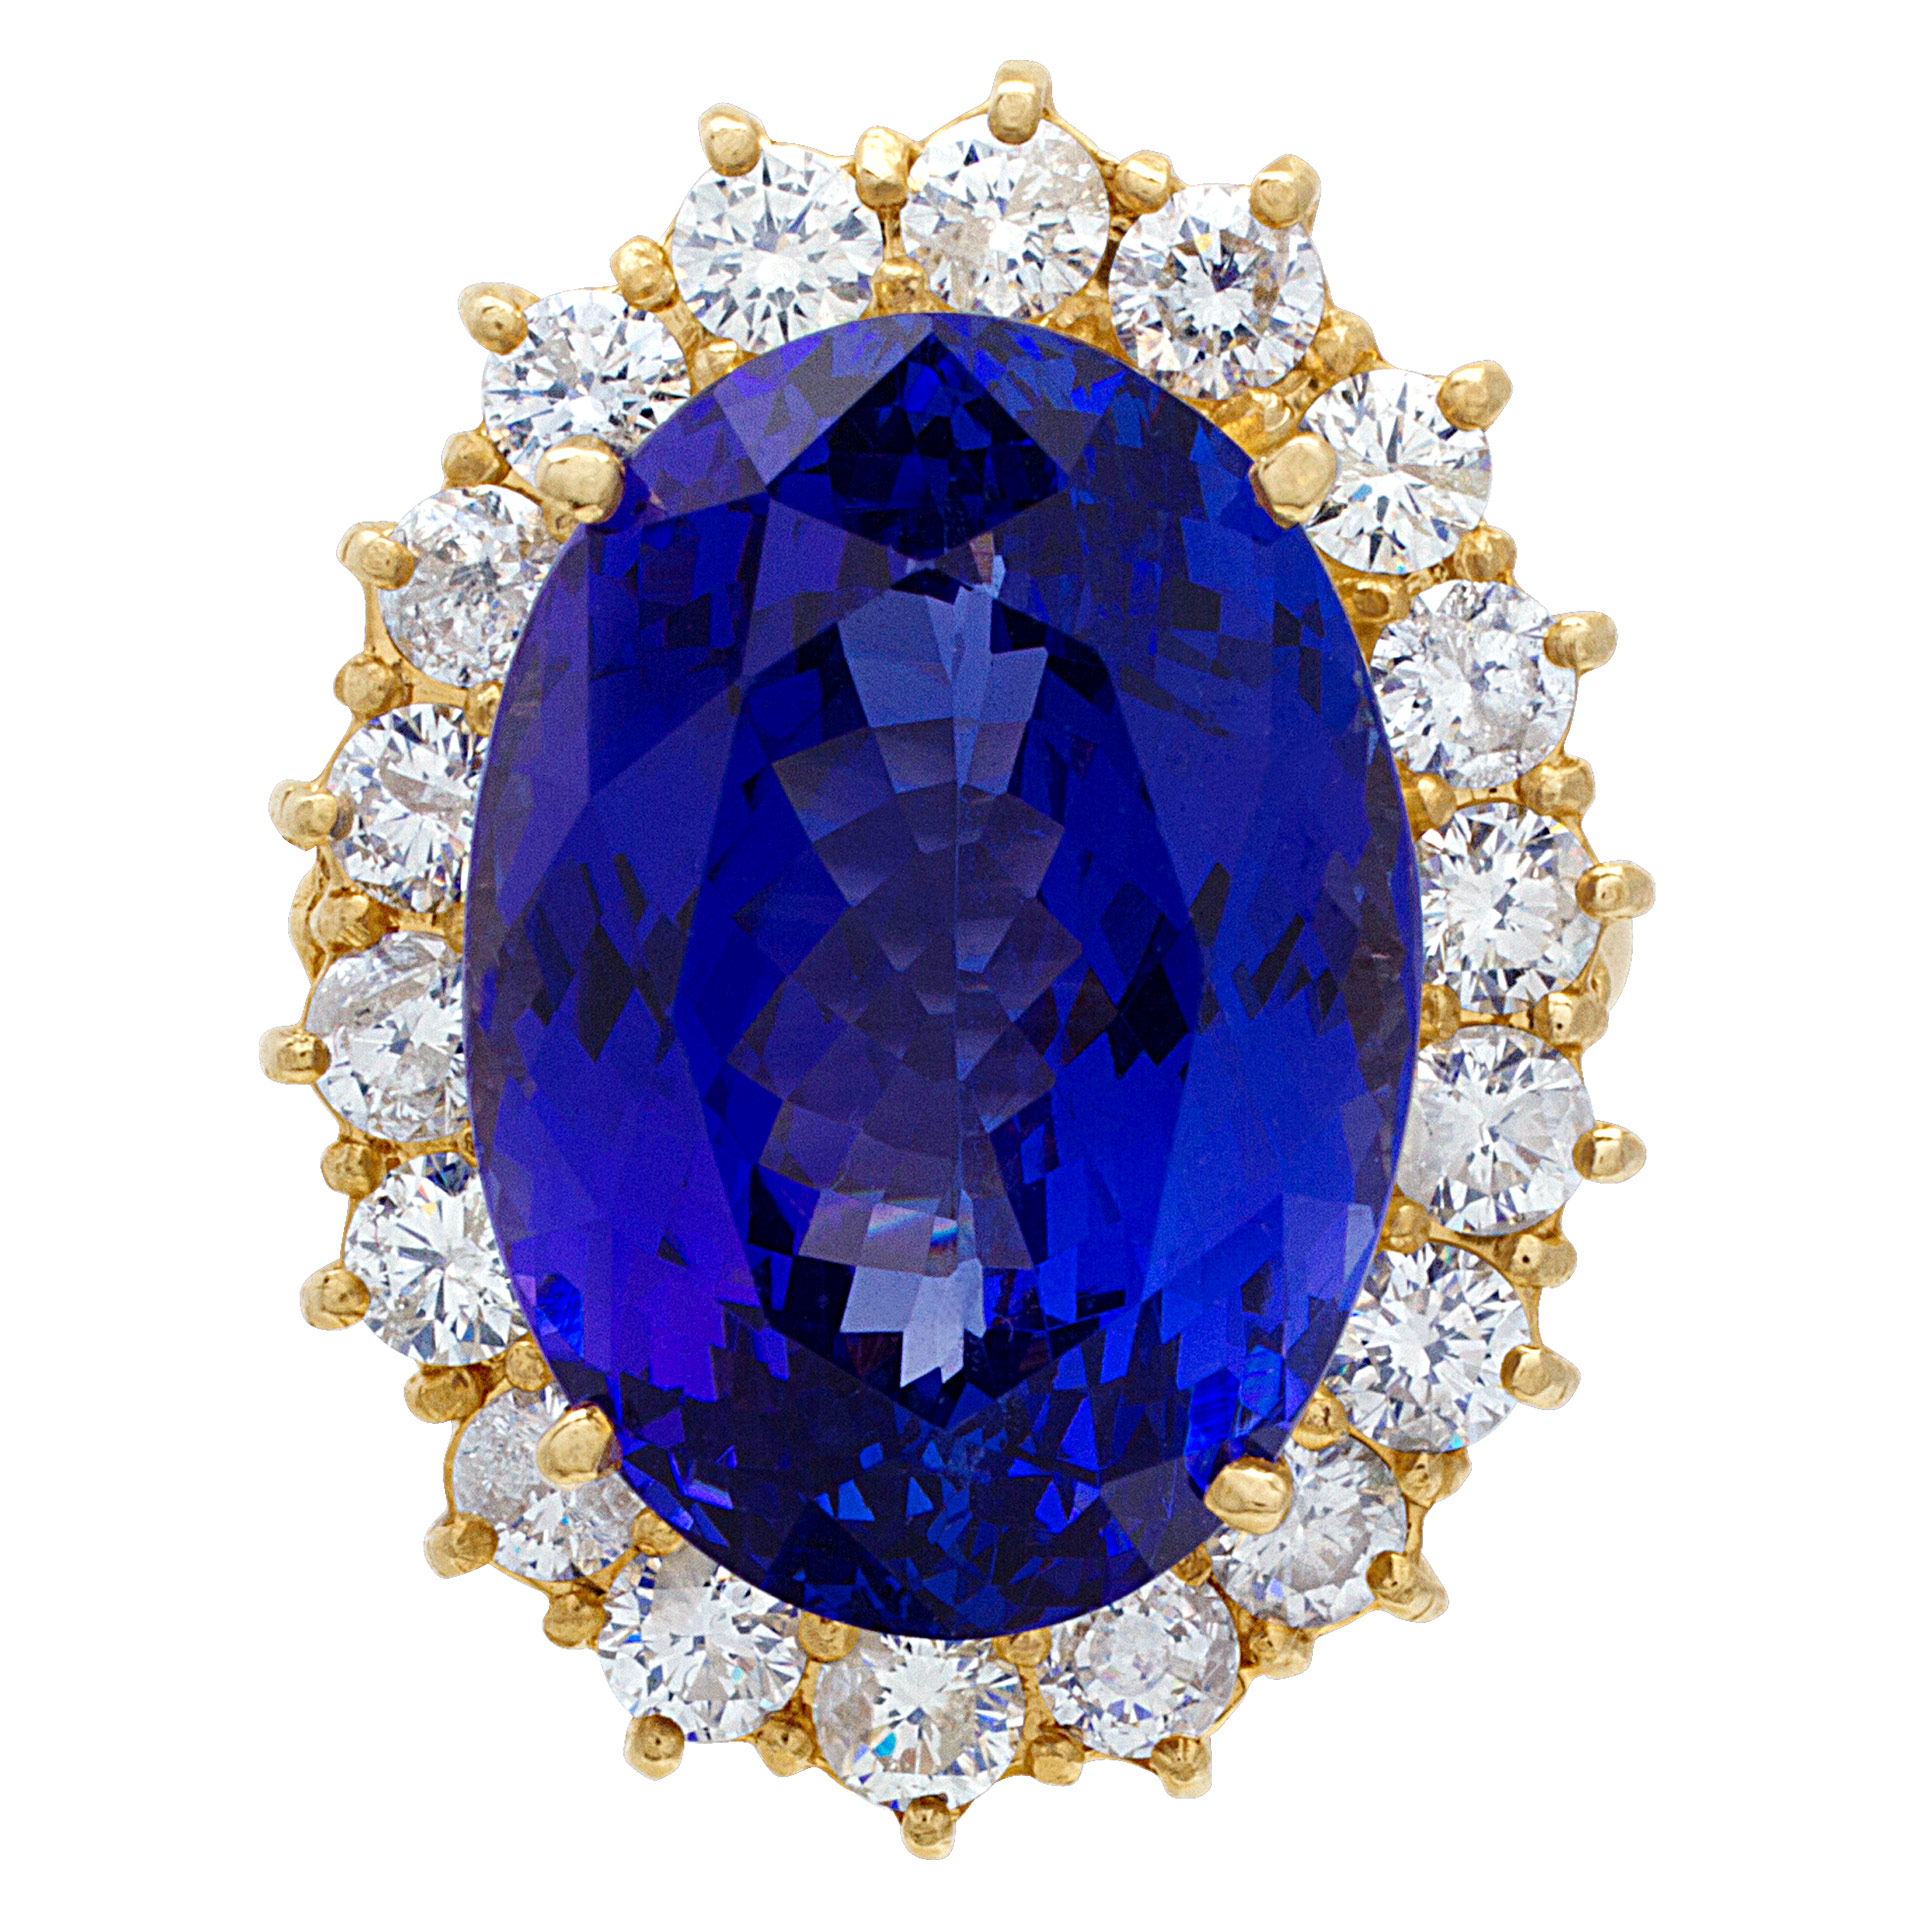 Tanzanite and diamond ring in 14k gold with approx. 25 carats tanzanite